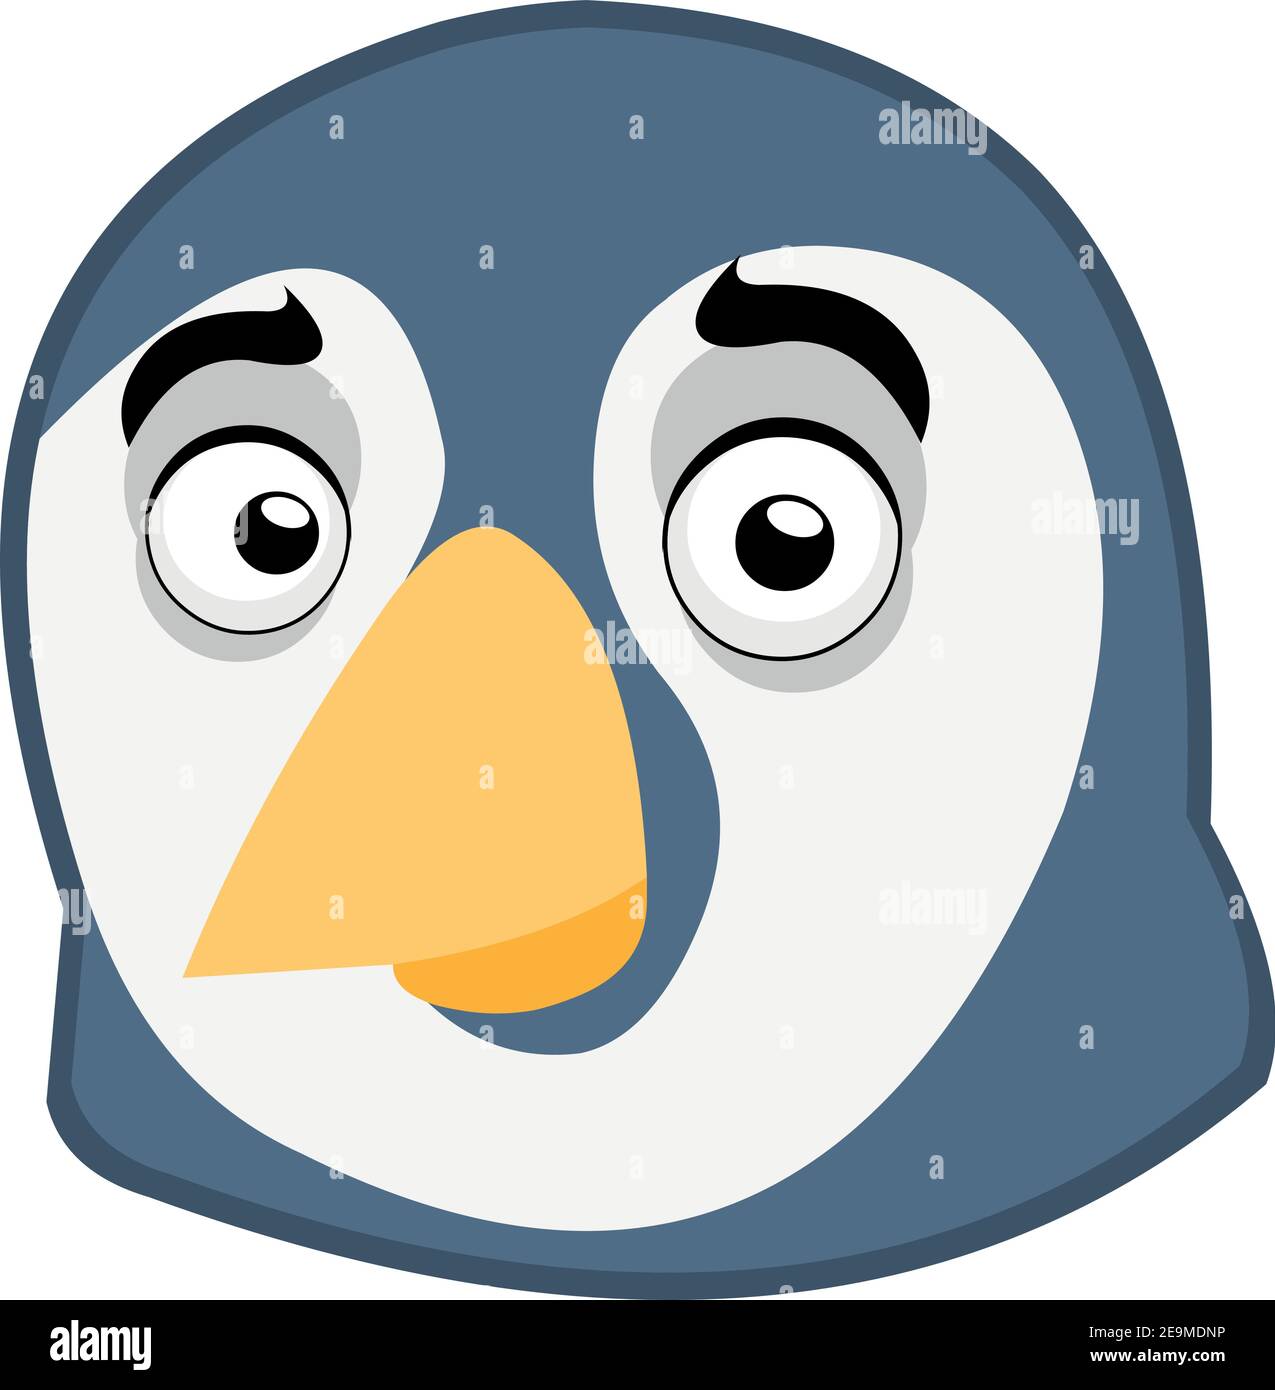 Vector illustration of the face of a penguin cartoon Stock Vector